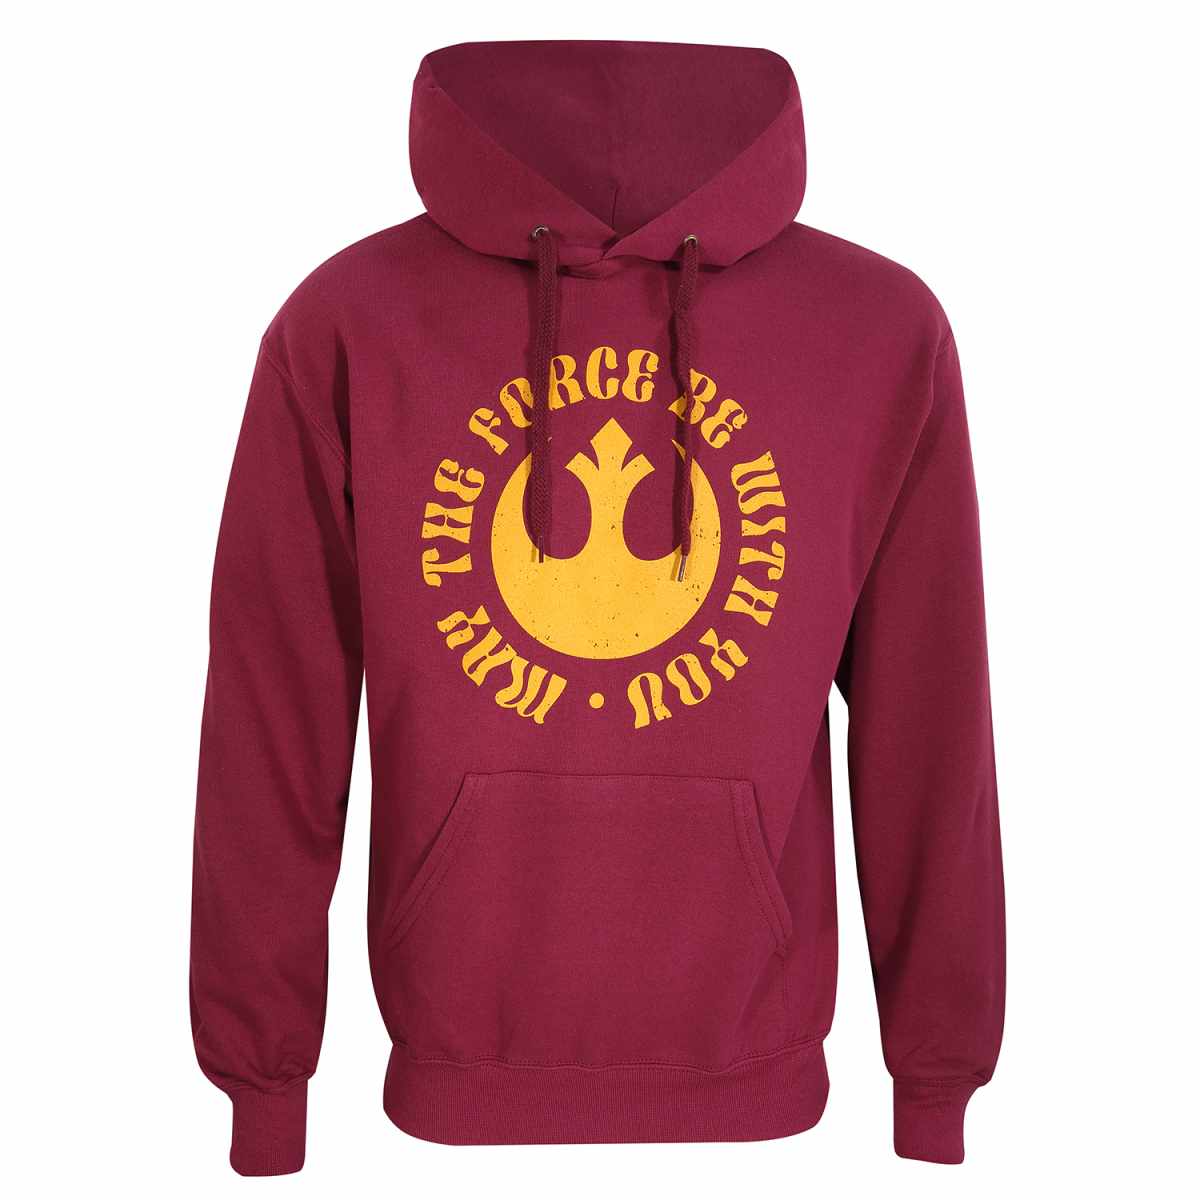 Star Wars May The Force Be With You Pullover Hoodie